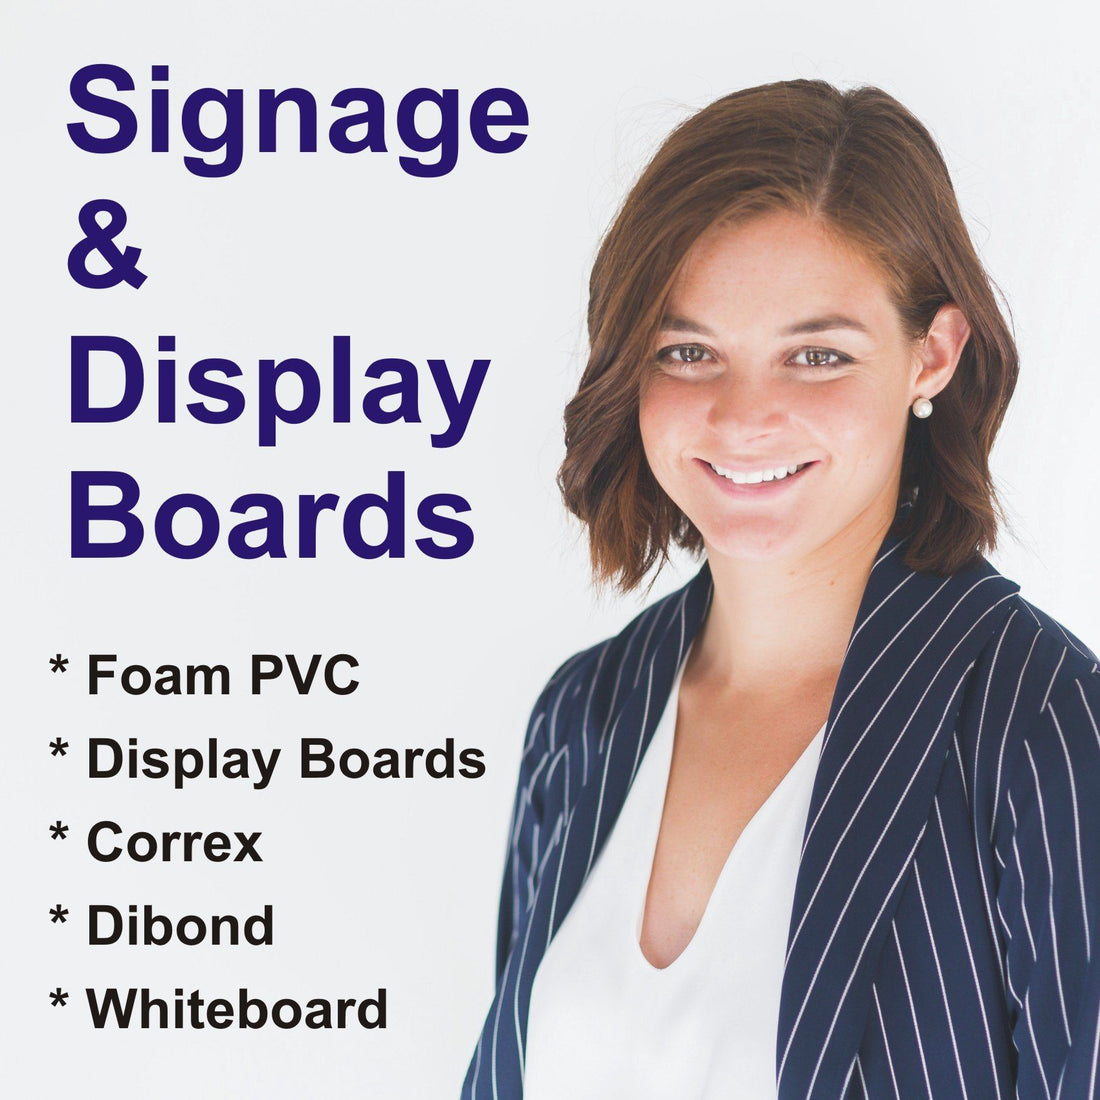 Do you need to Order Signage & Display Boards?